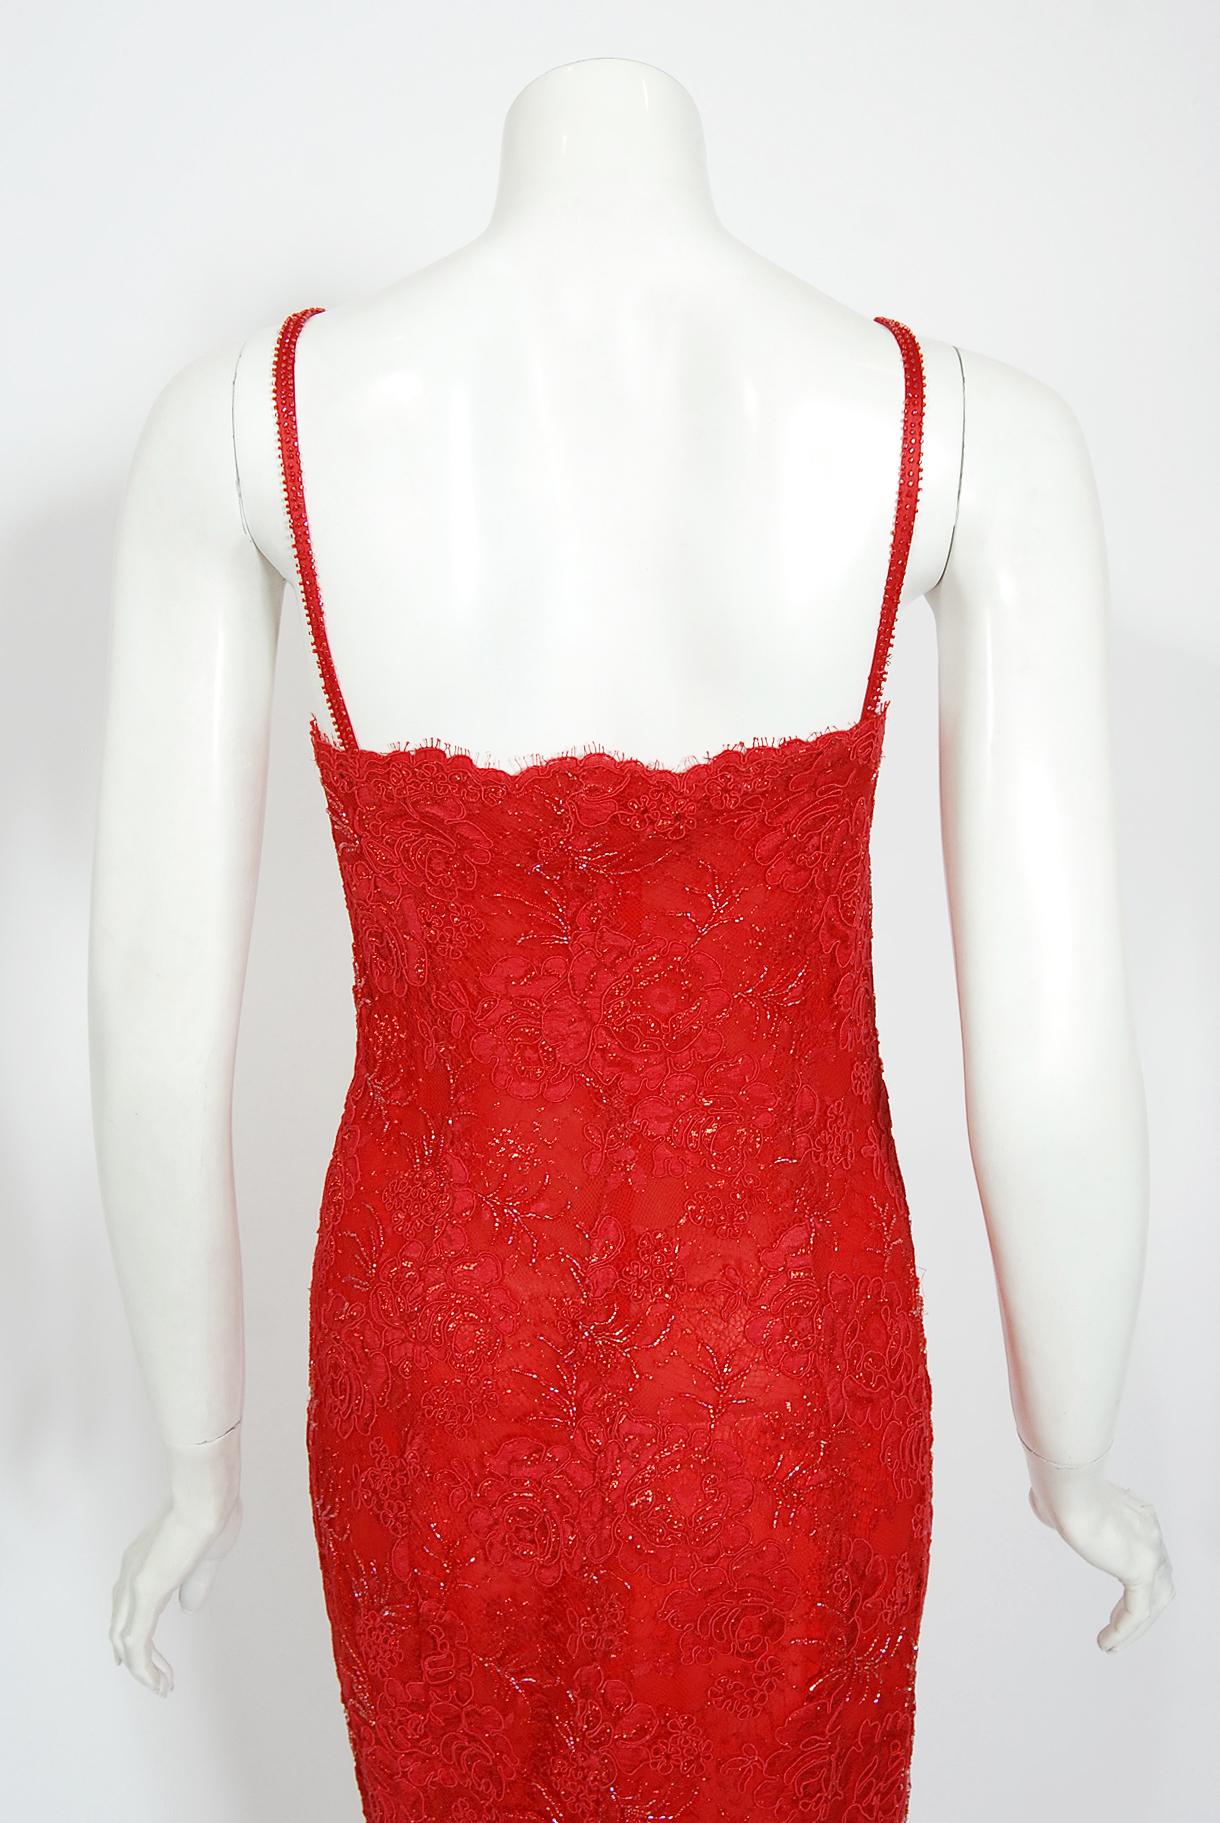 Vintage 1996 Ungaro Haute Couture Red Beaded Floral Lace Hourglass Gown & Jacket 13